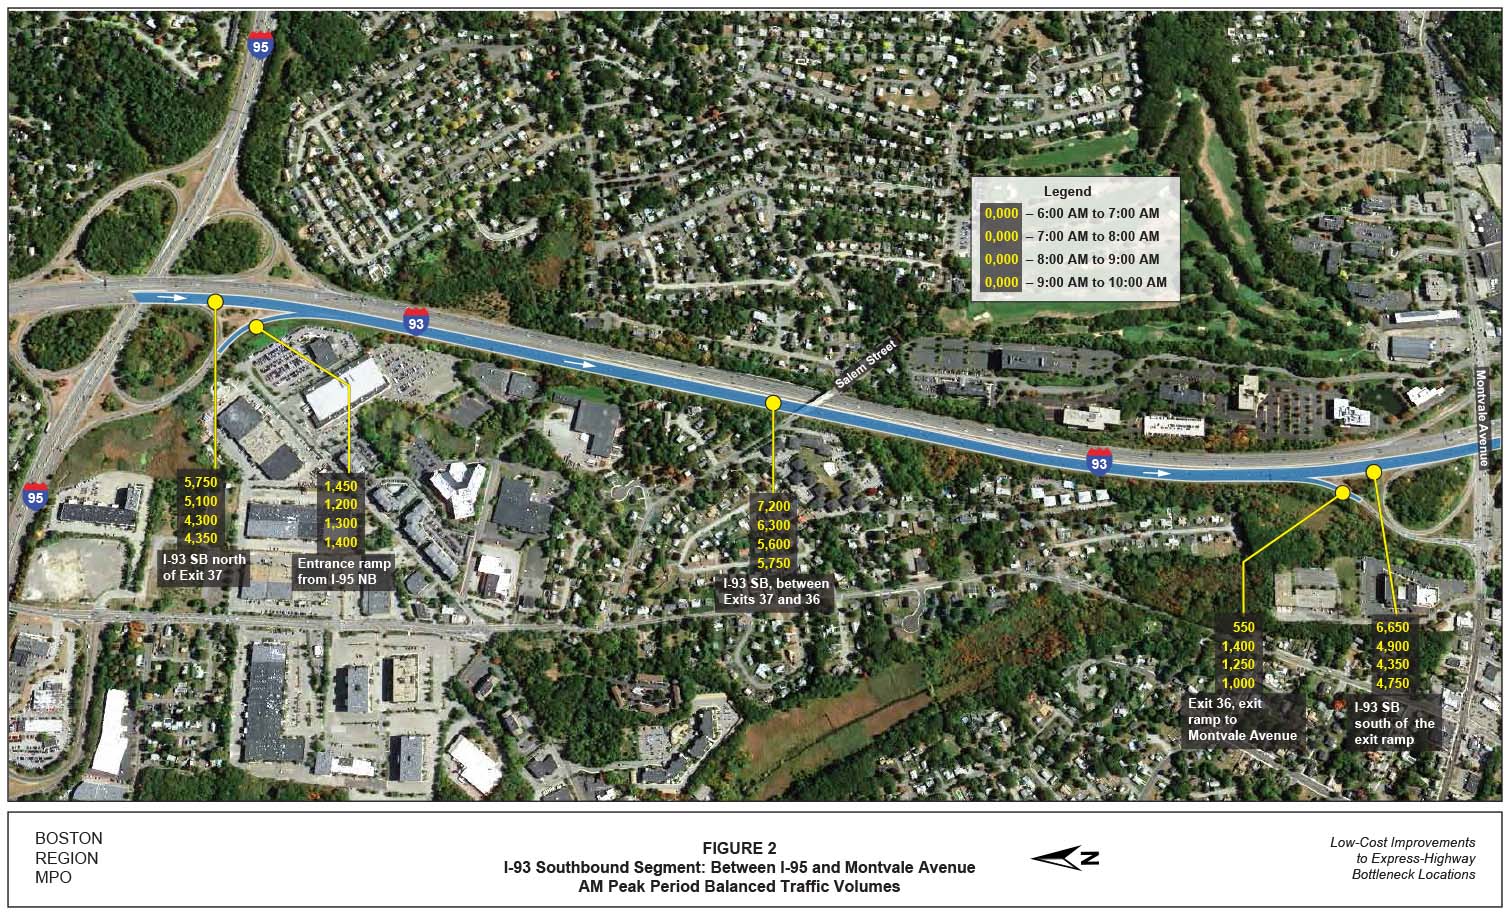 FIGURE 2. Aerial-view map showing the AM peak-period balanced traffic volumes for the I-93 southbound segment between I-95 and Montvale Avenue